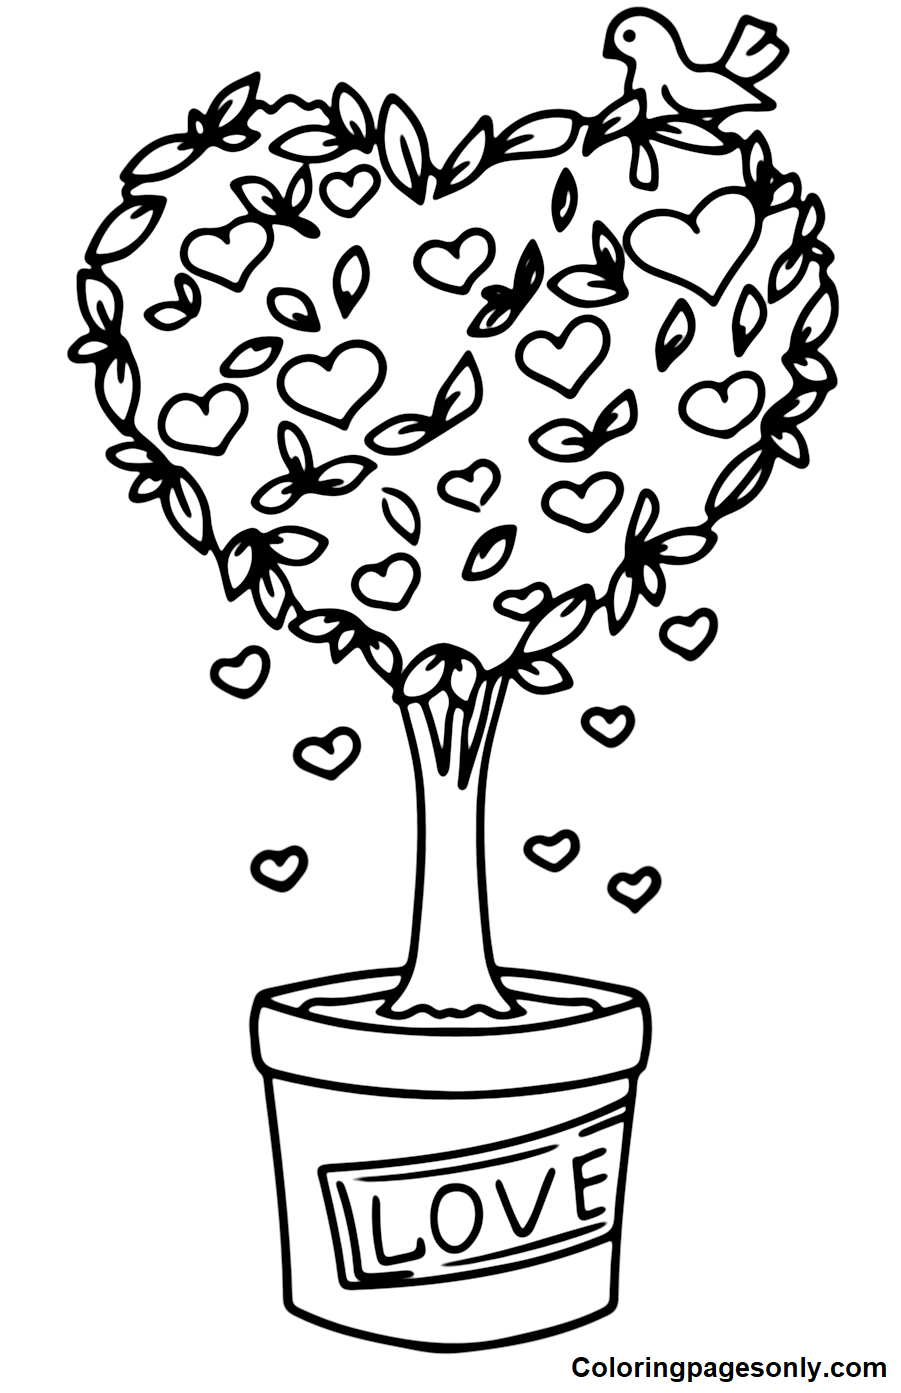 Tree Valentine’s Day Coloring Pages